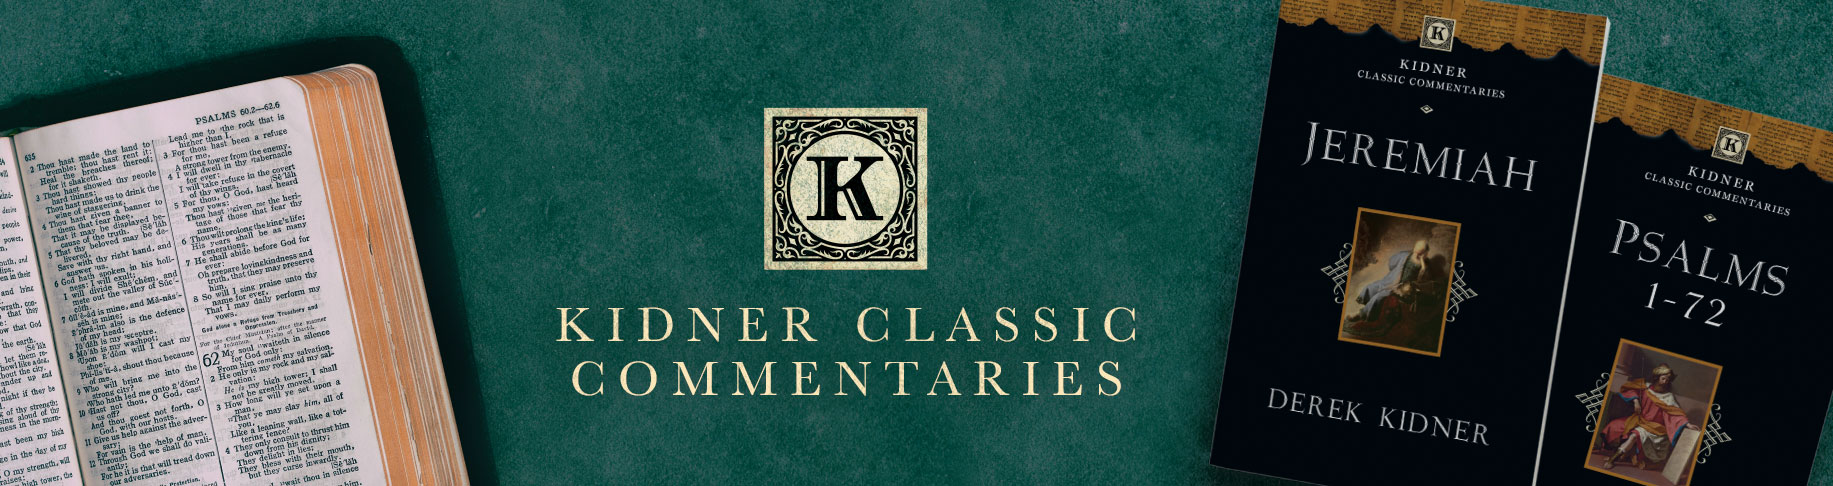 Kidner Classic Commentaries